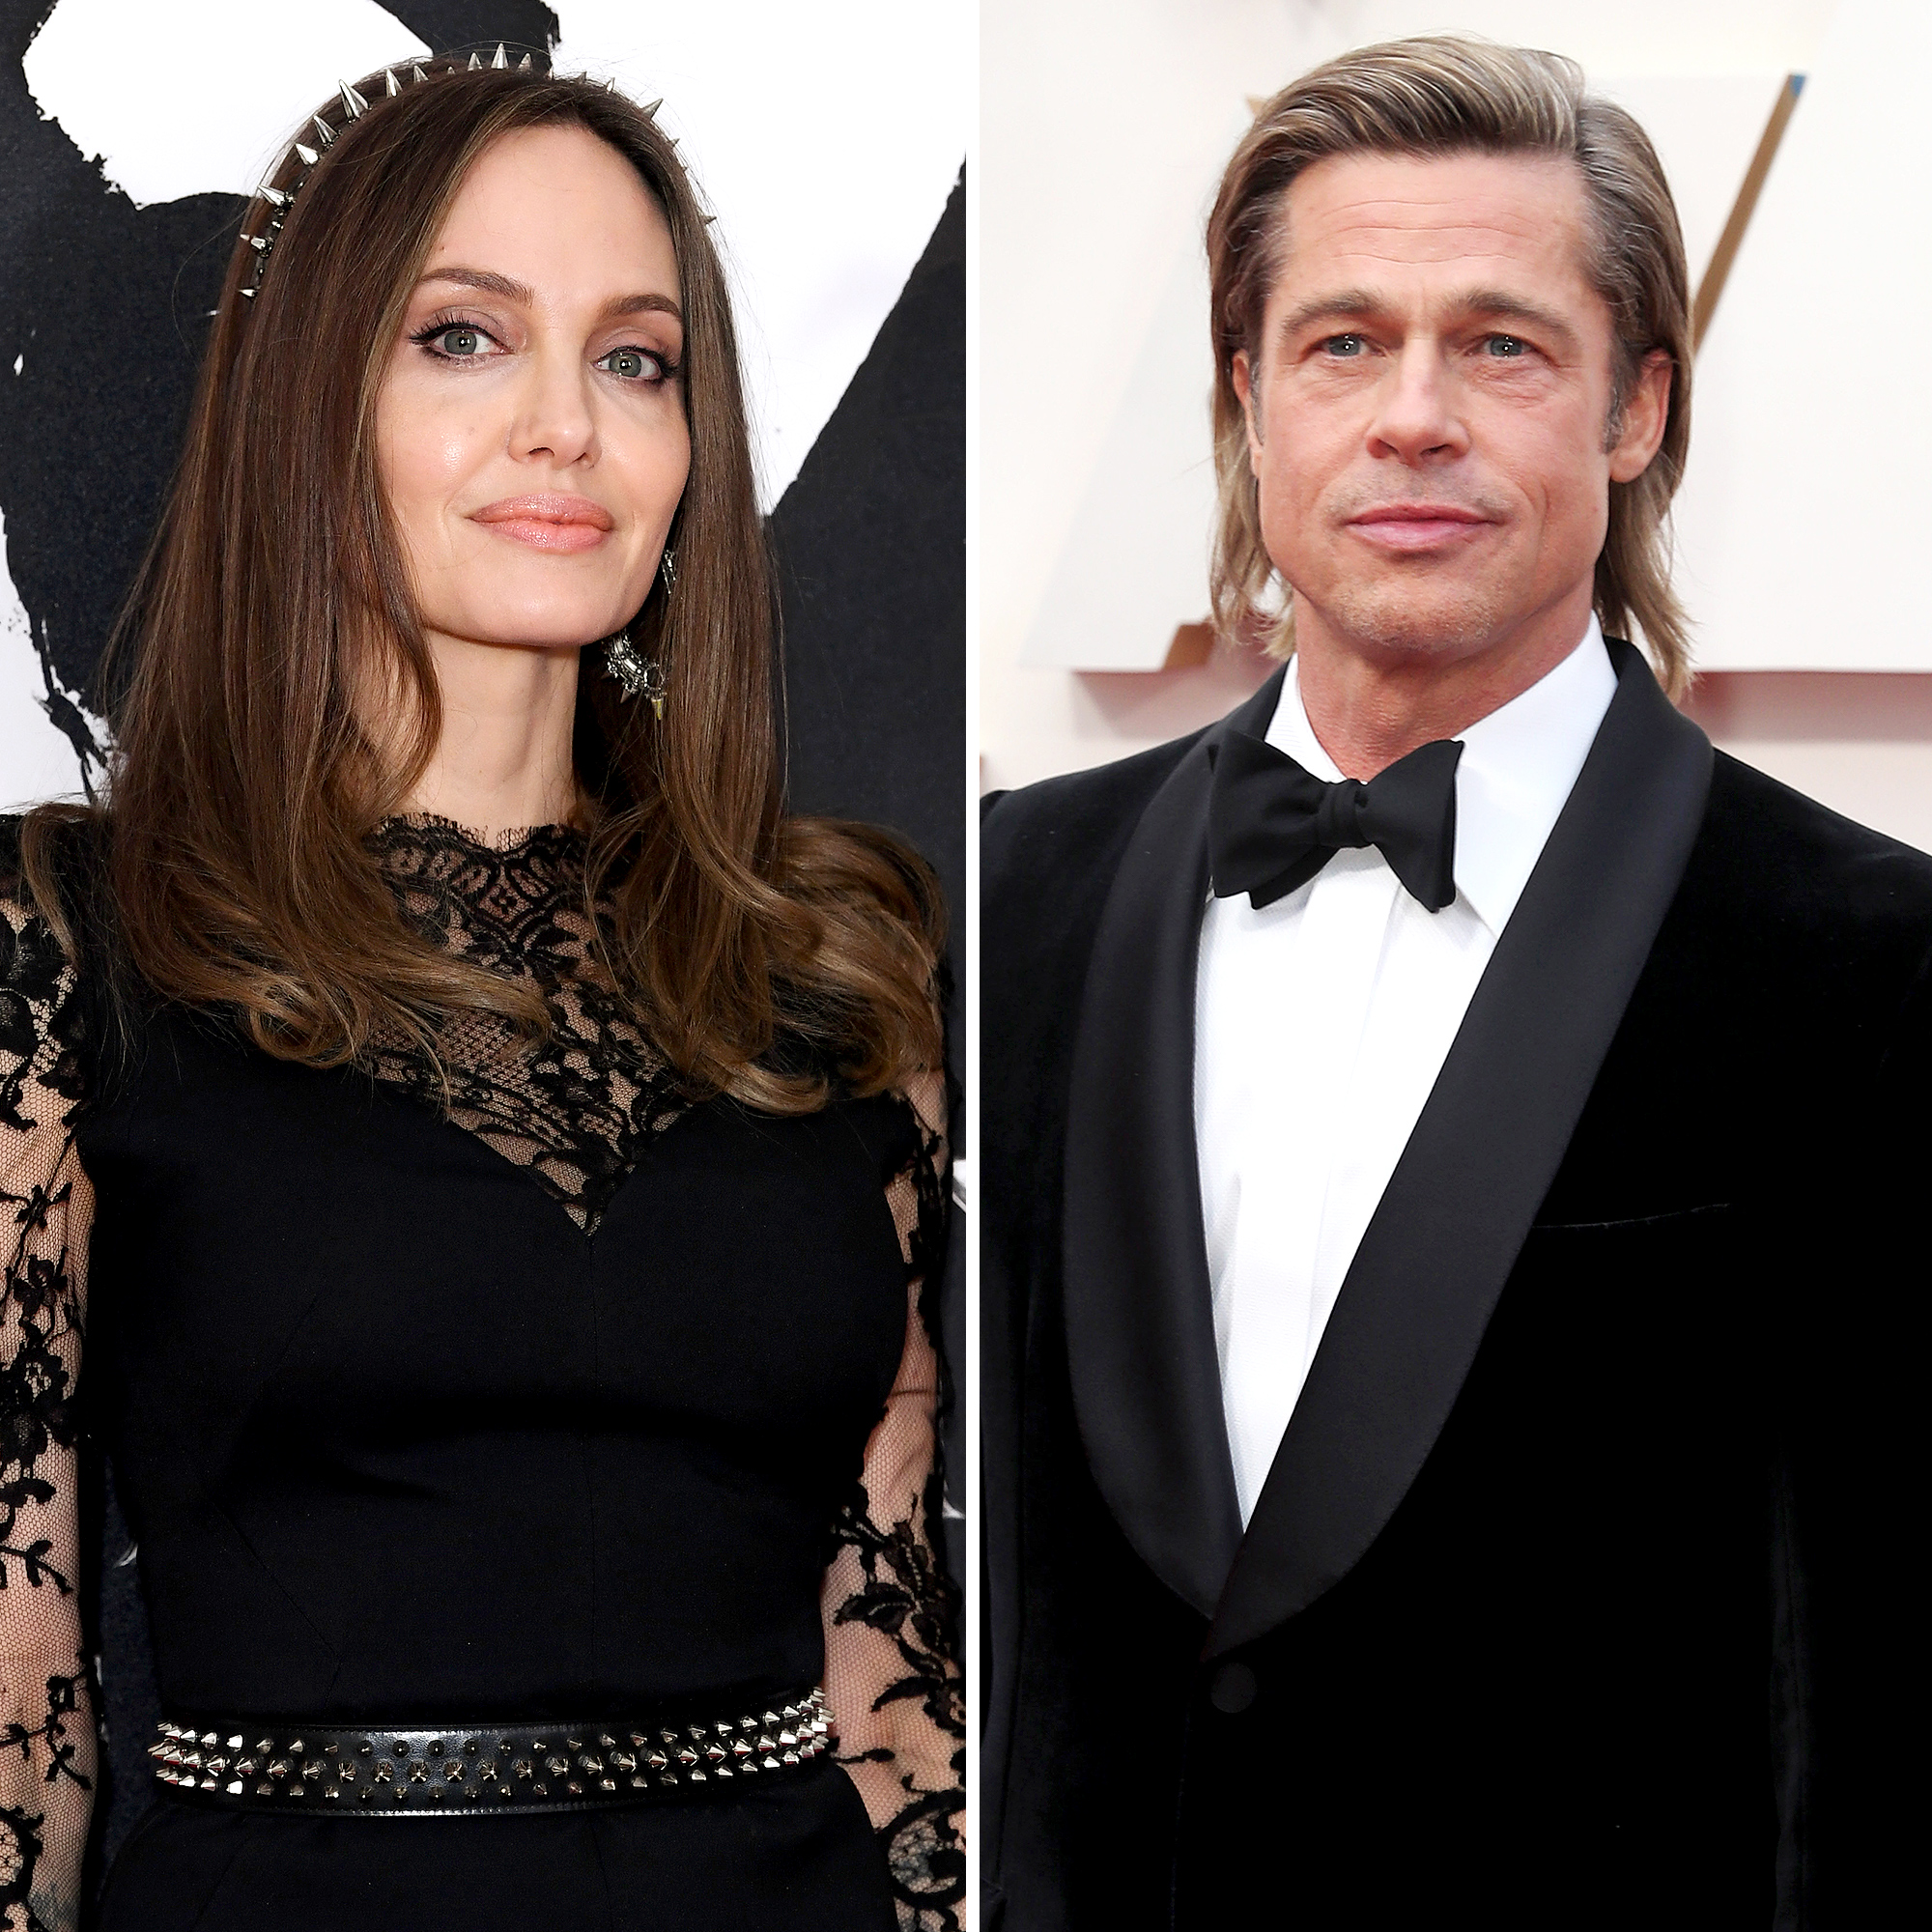 Angelina Jolie may quit acting once free of Brad Pitt divorce battles